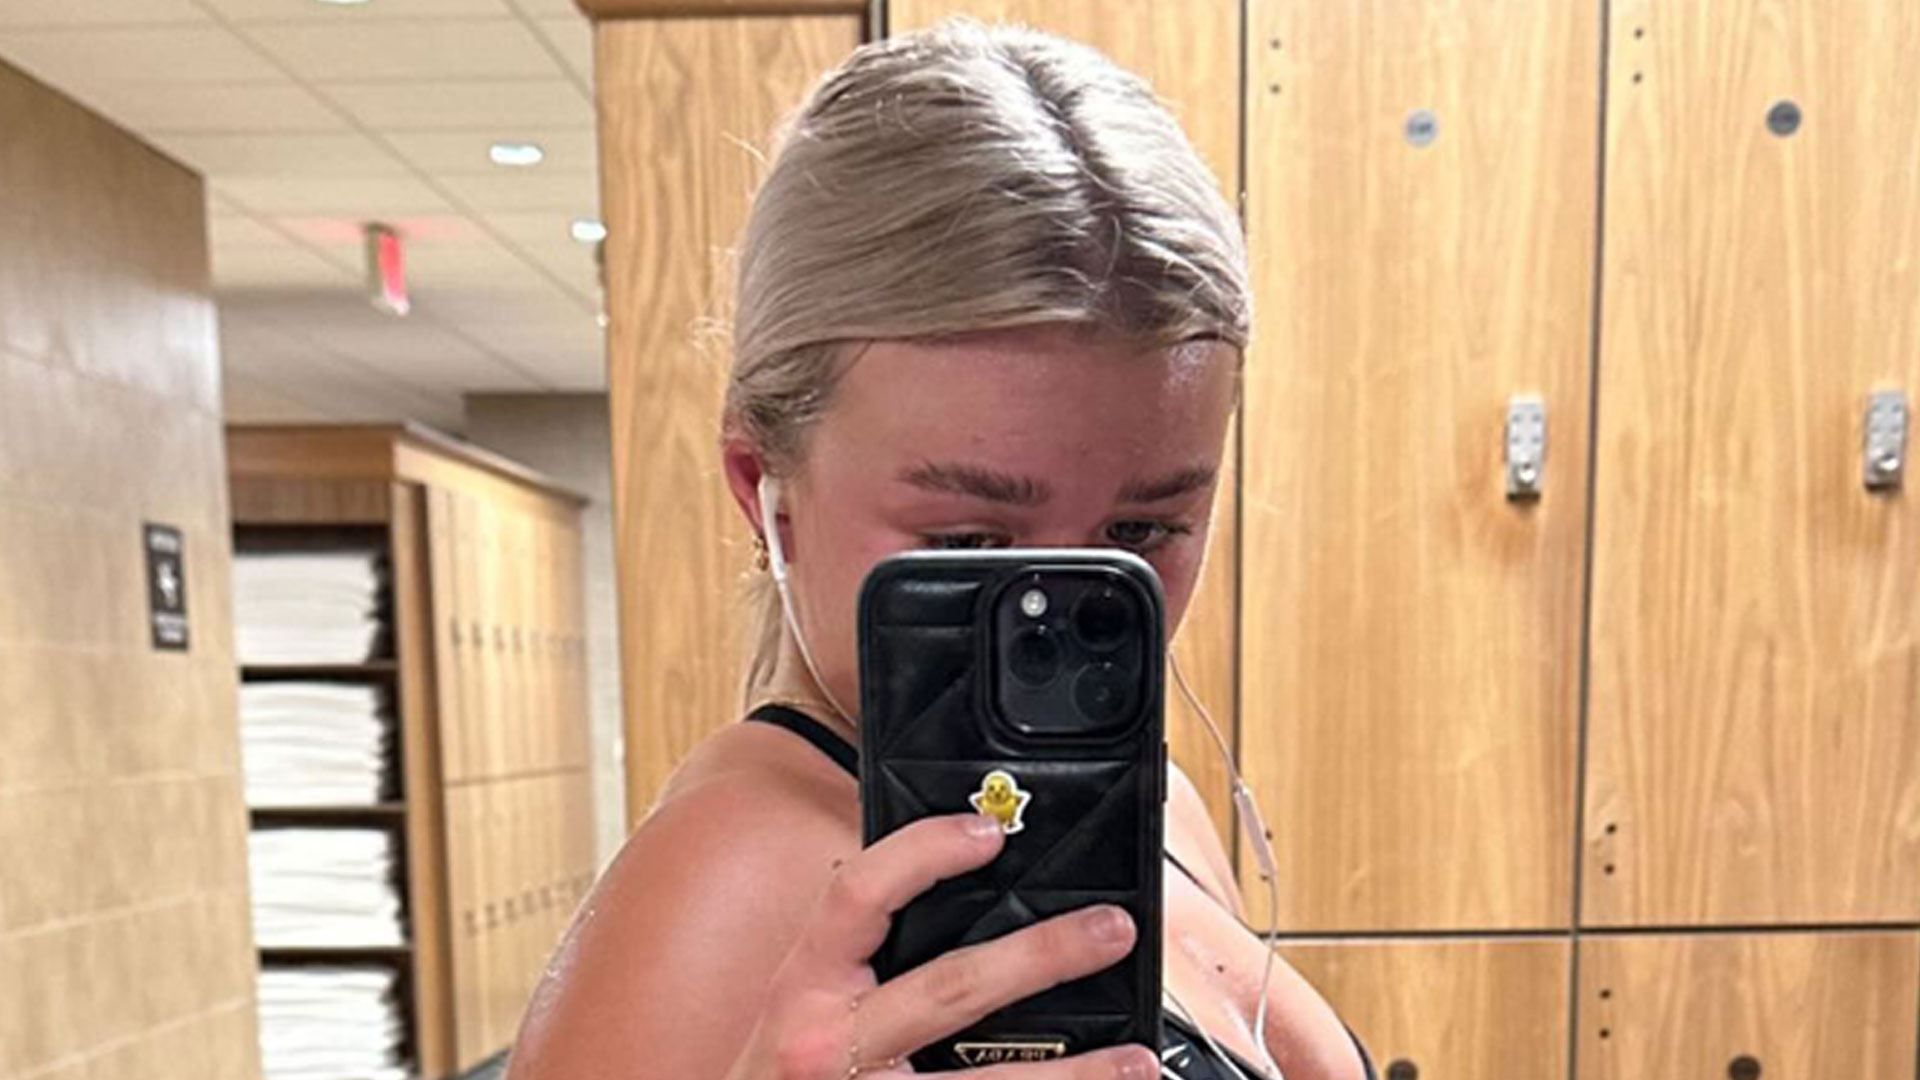 Paige Spiranac rival Katie Sigmond shows off her bum in skintight shorts and sports bra after workout